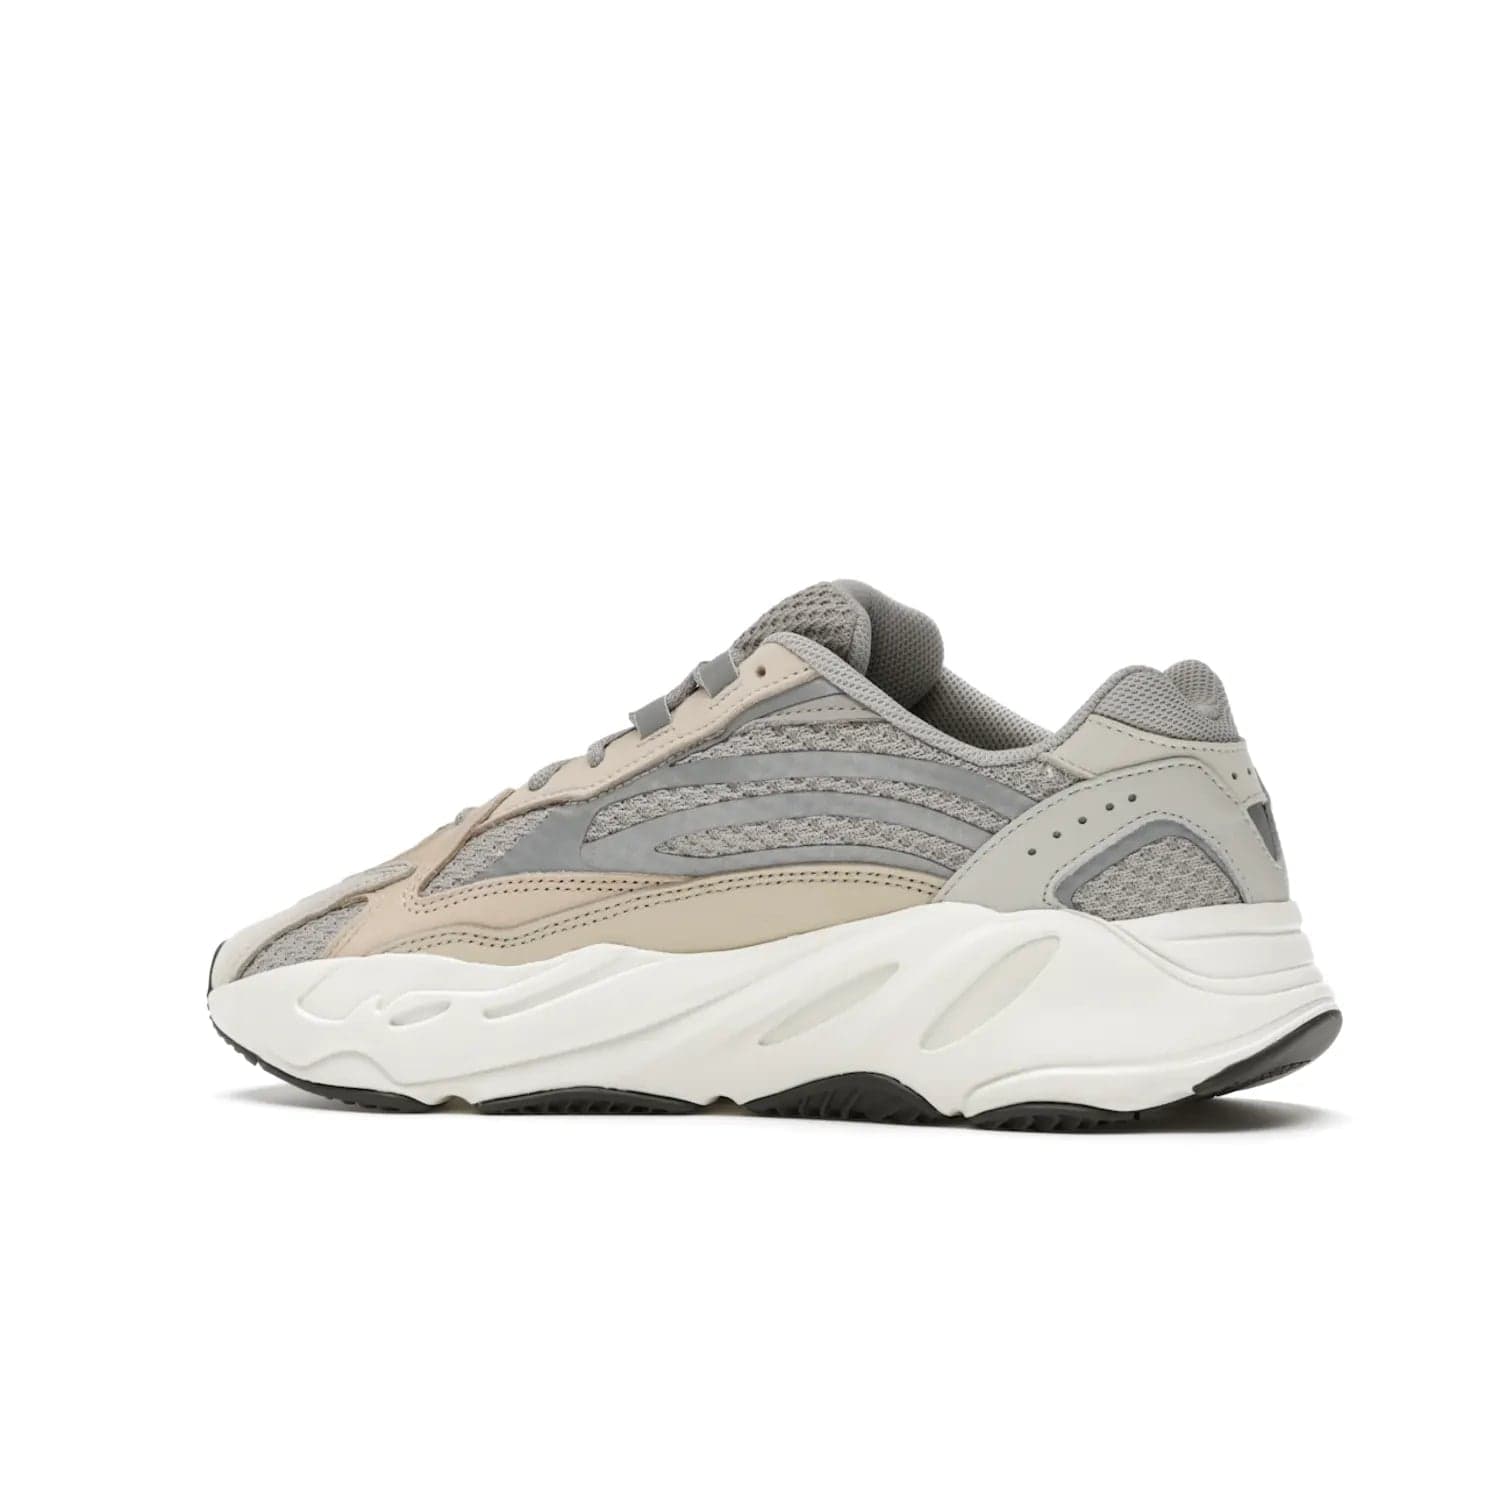 adidas Yeezy Boost 700 V2 Cream - Image 21 - Only at www.BallersClubKickz.com - Add style and luxury to your wardrobe with the adidas Yeezy 700 V2 Cream. Featuring a unique reflective upper, leather overlays, mesh underlays and the signature BOOST midsole, this silhouette is perfect for any stylish wardrobe.